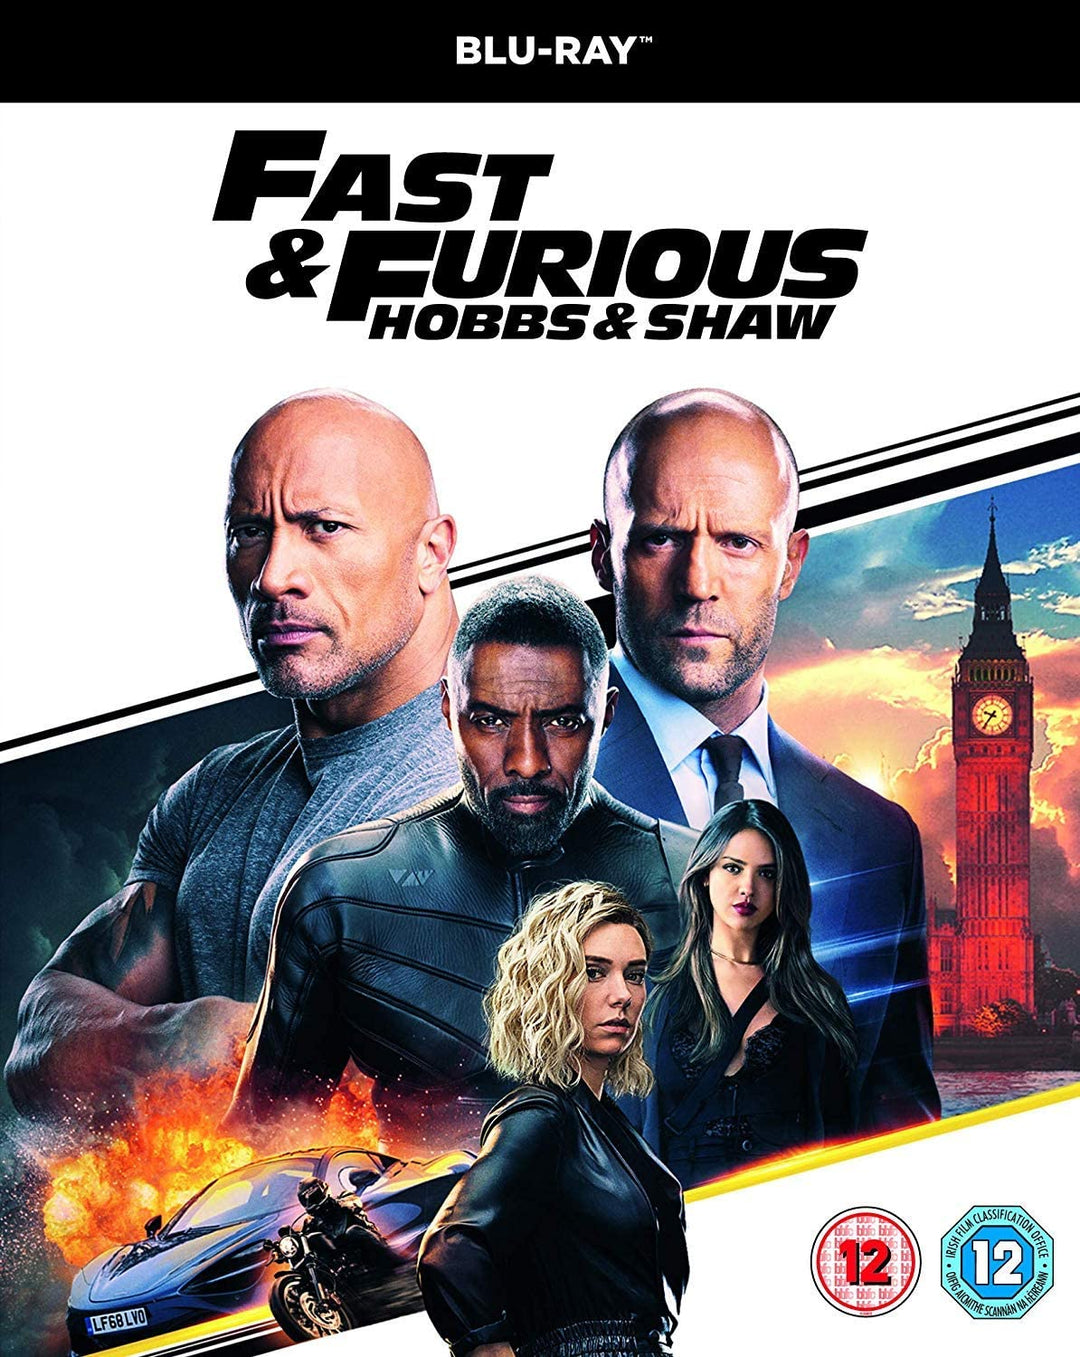 Fast & Furious Presents Hobbs & Shaw - Action/Buddy cop [Blu-Ray]